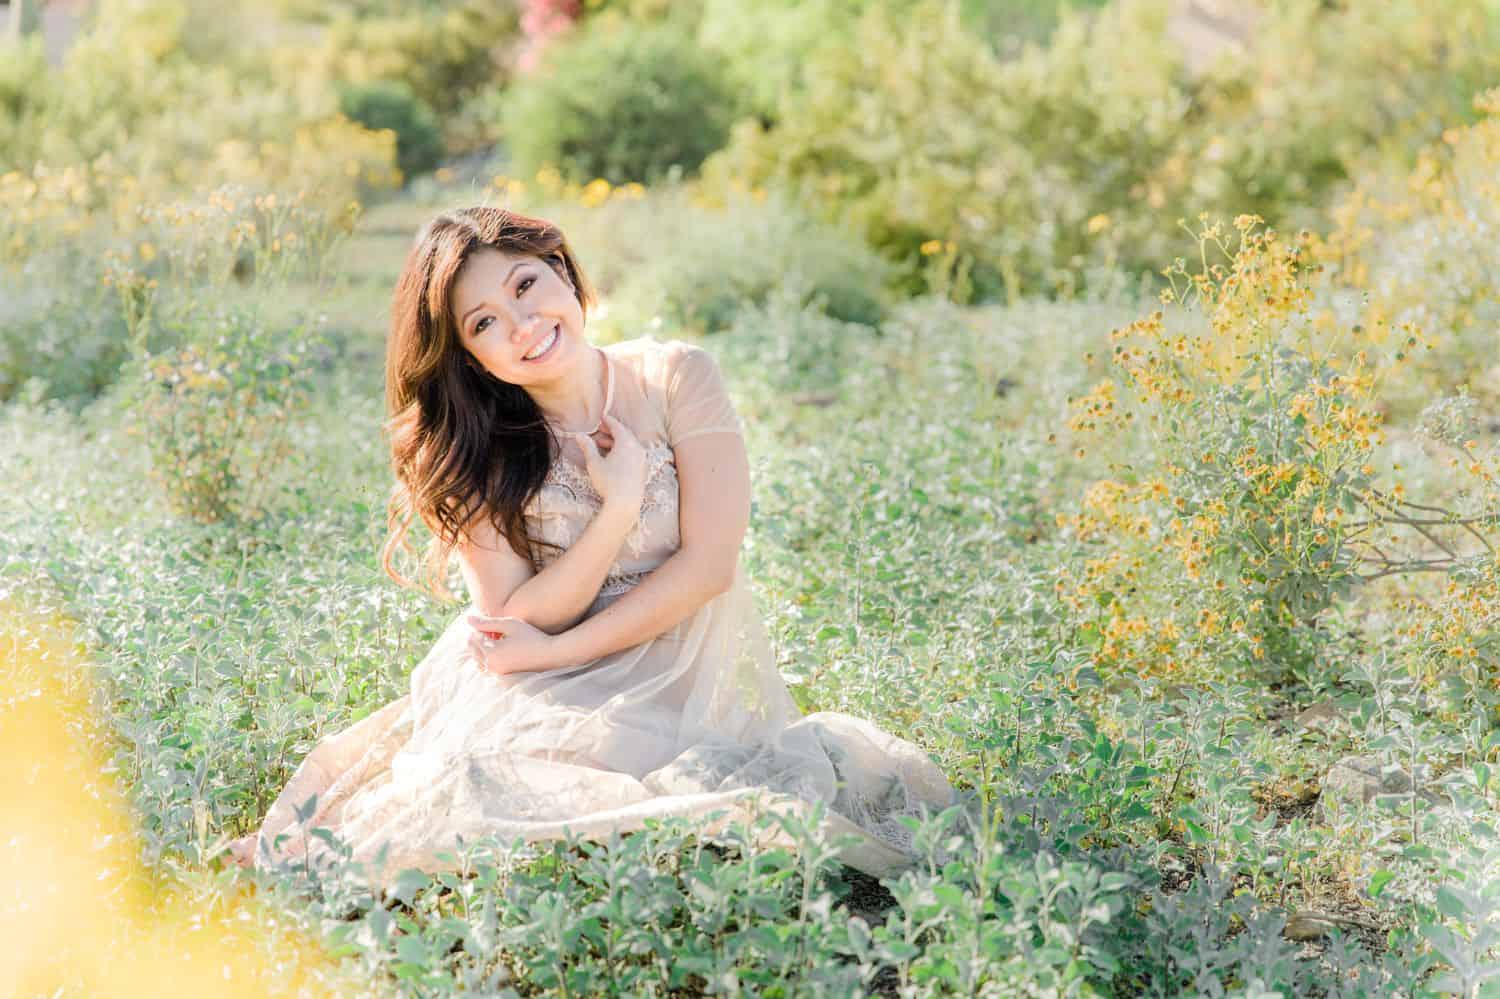 A pregnant mother sits sweetly in an overgrown field full of wildflowers